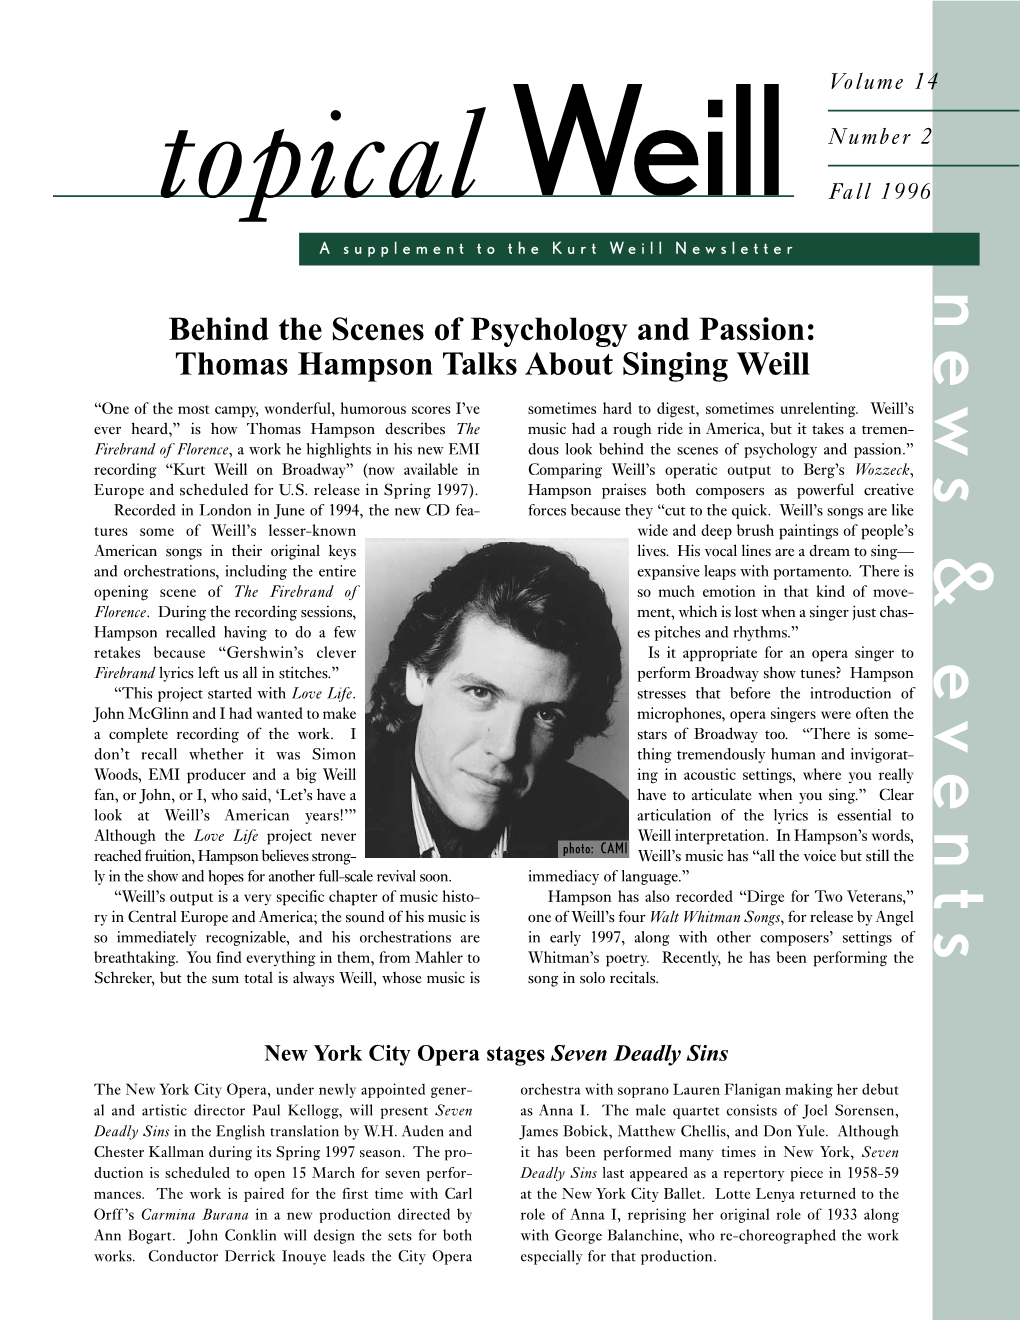 Topical Weill: News and Events